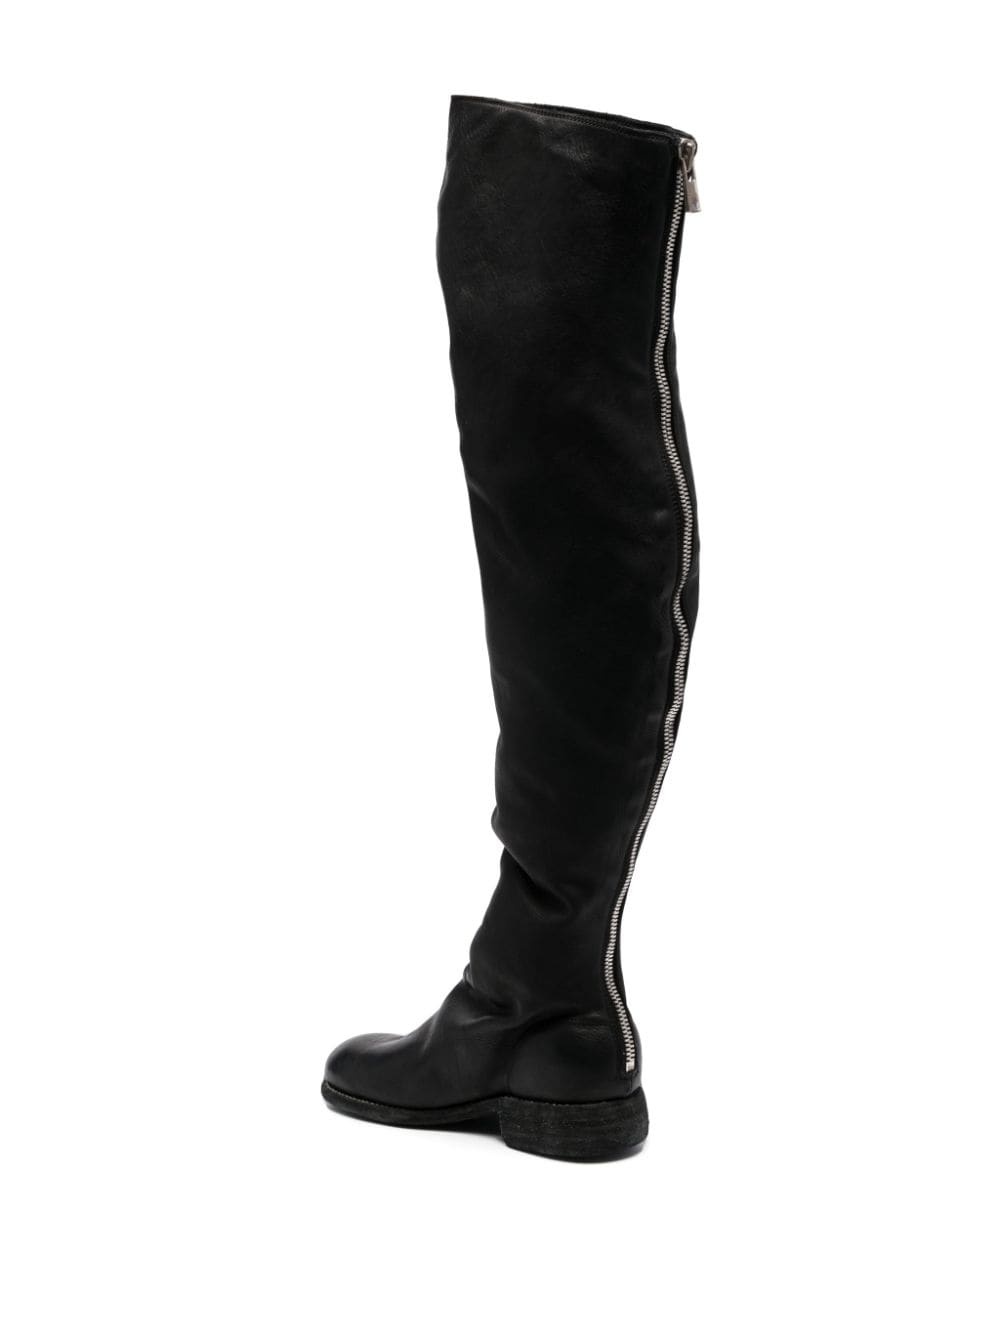 thigh-lenth leather boots - 3